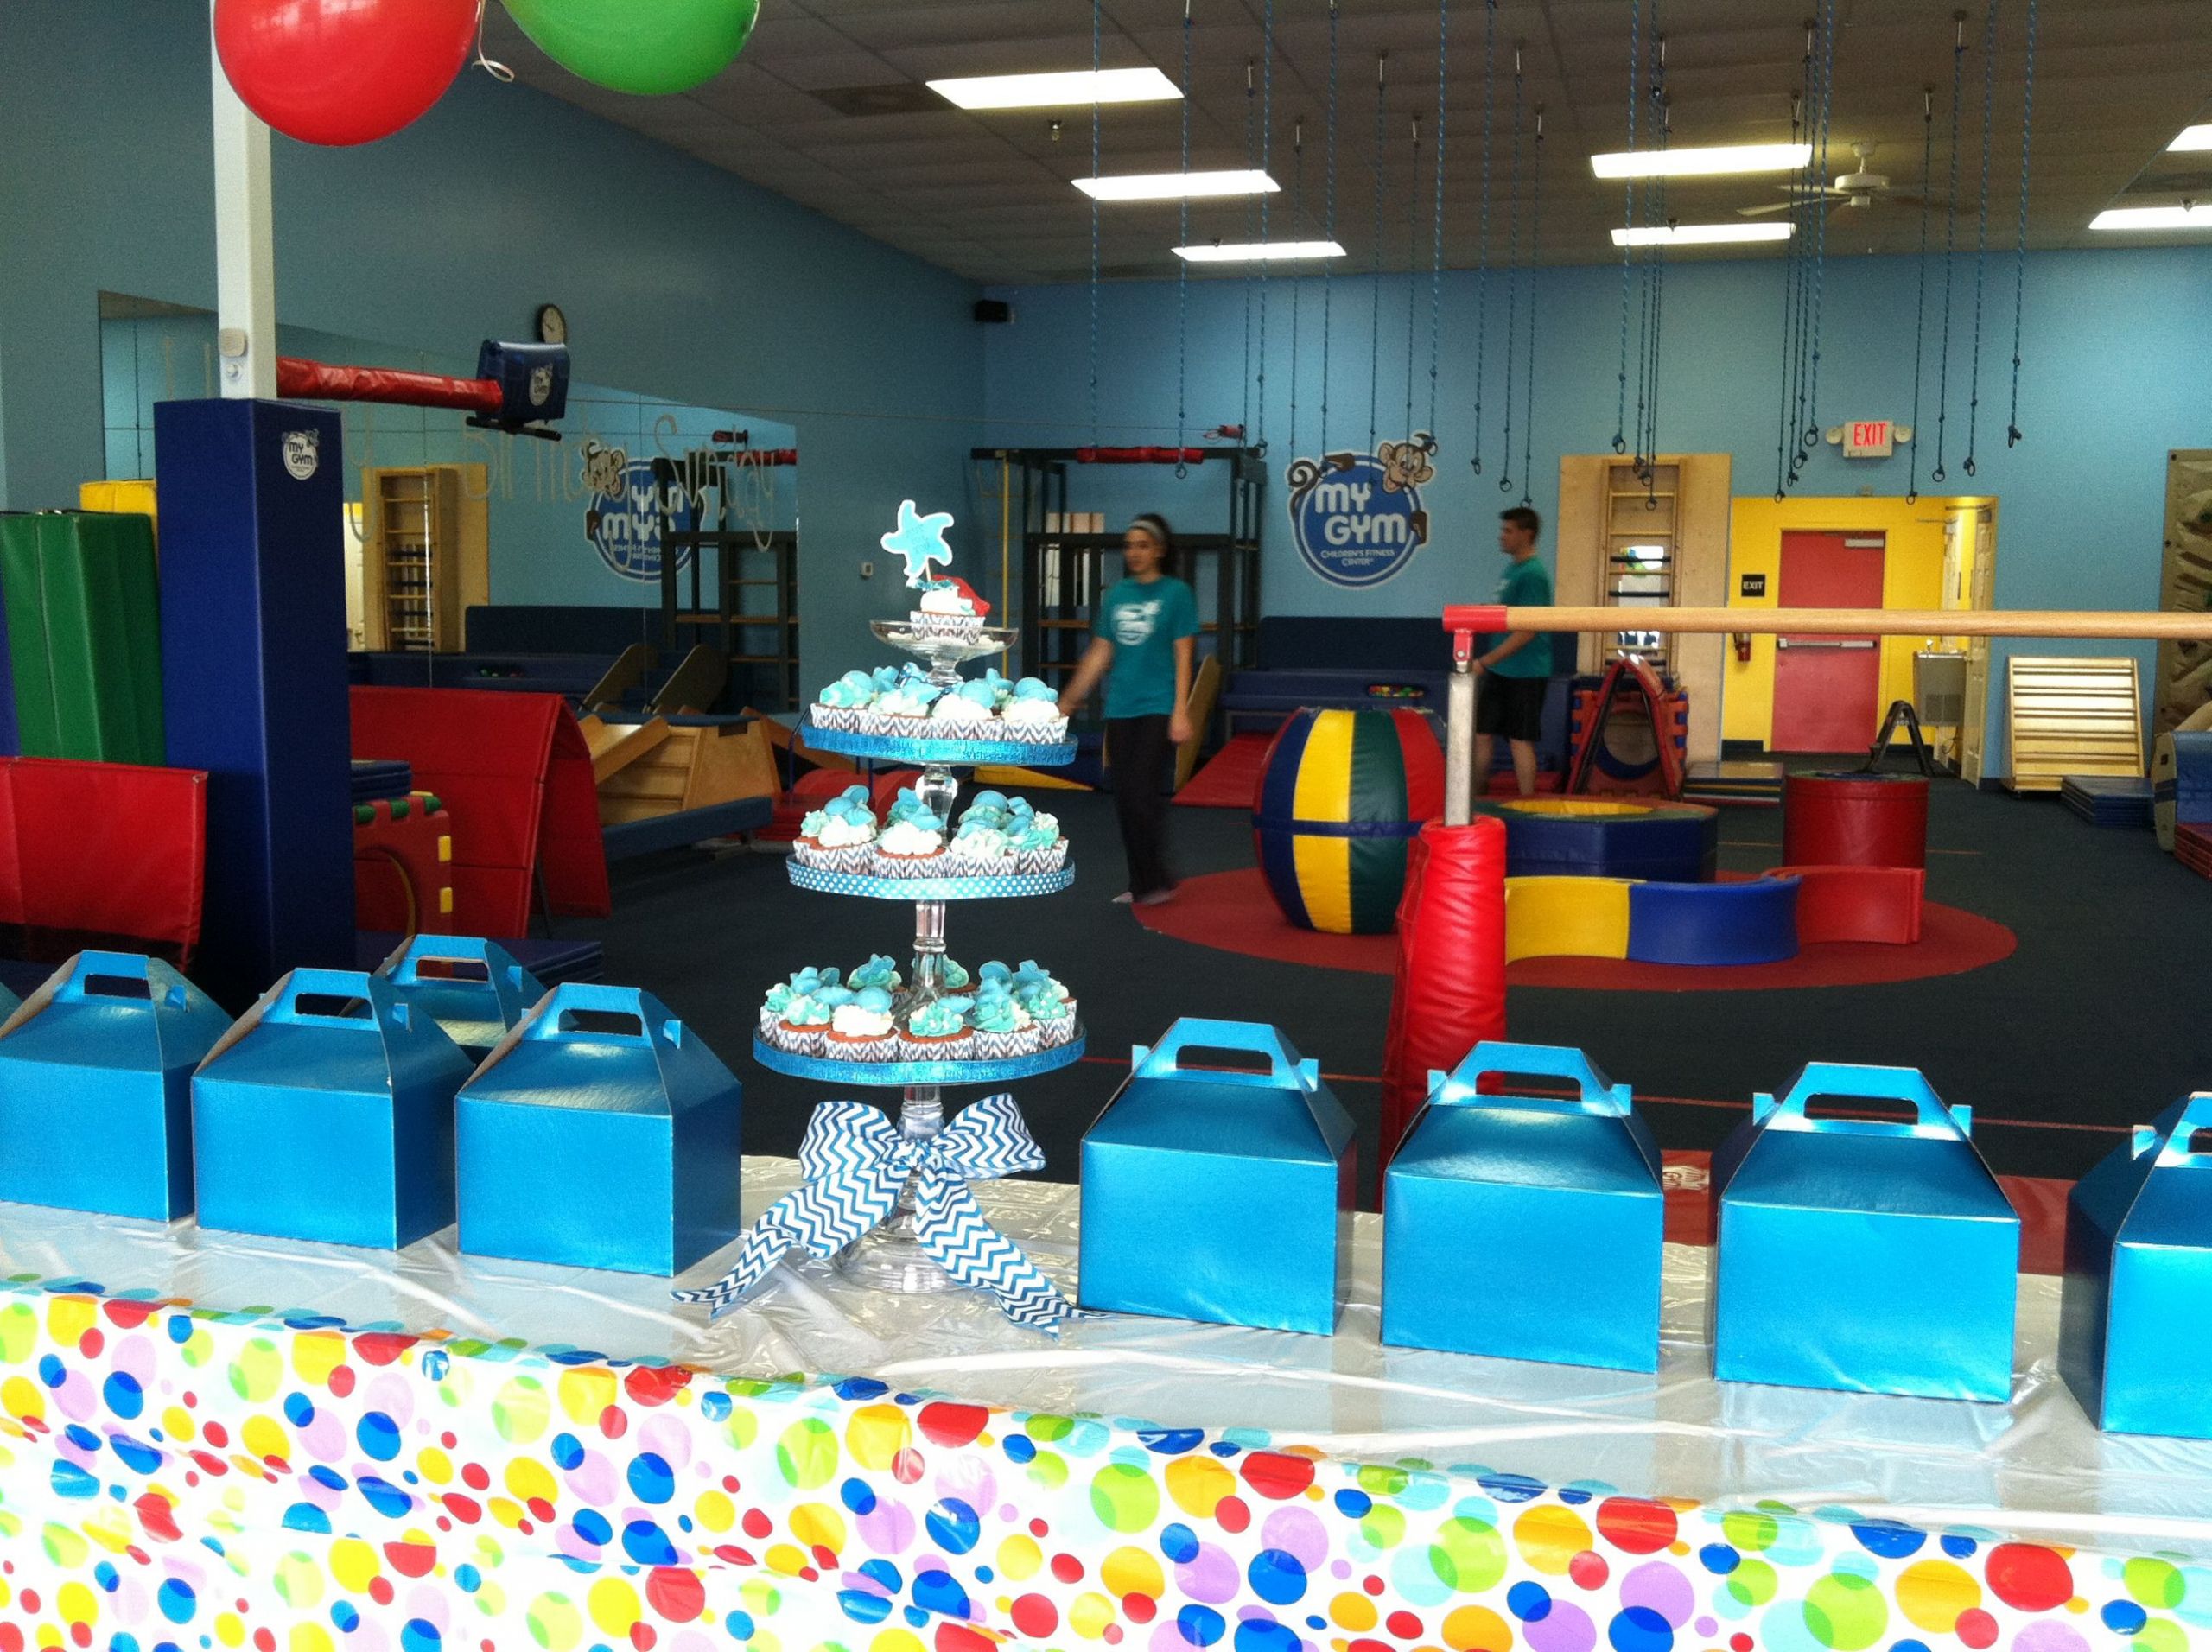 My Gym Birthday Party
 final product NK My Gym party 7 7 13